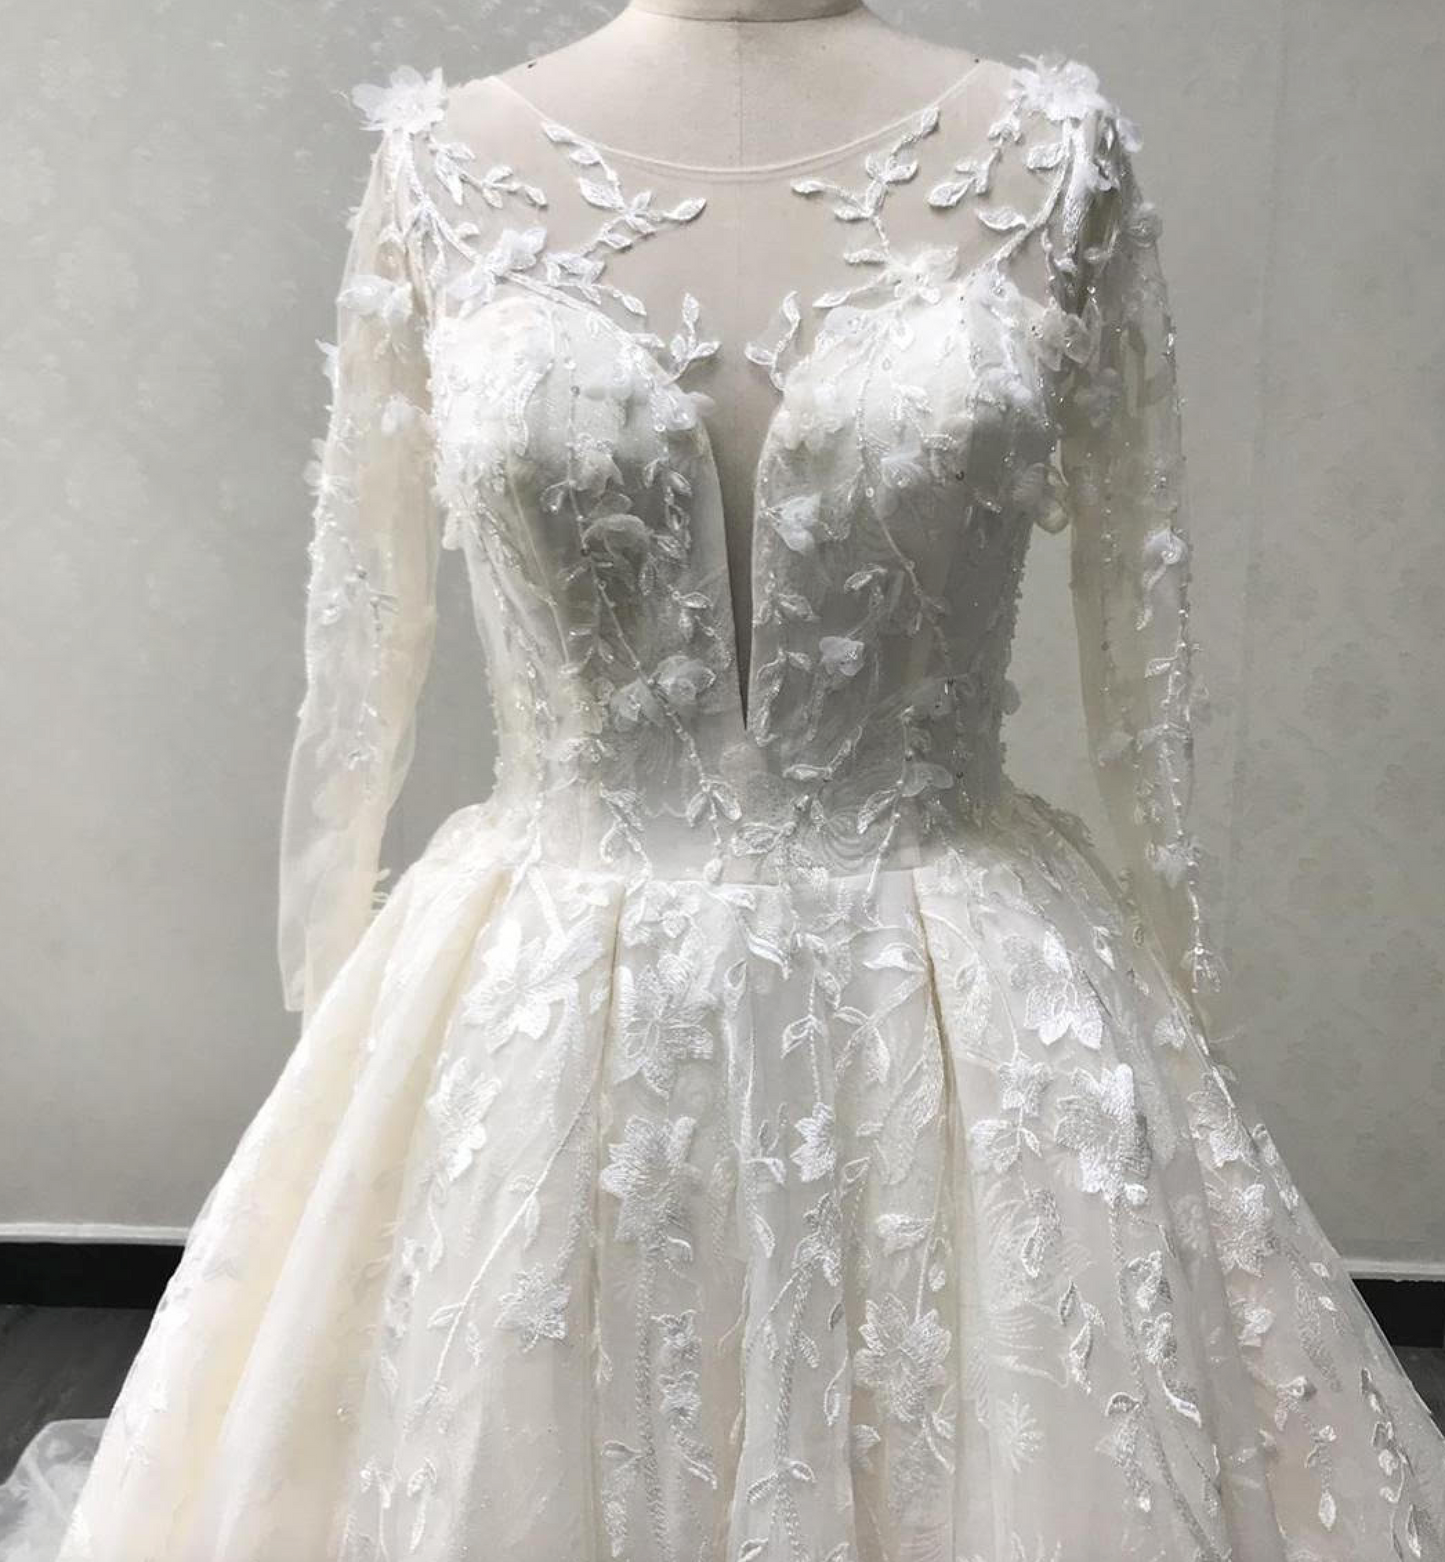 Illusion 3D Lace Pleated Skirt Bridal Gown Long Sleeve Wedding Dress